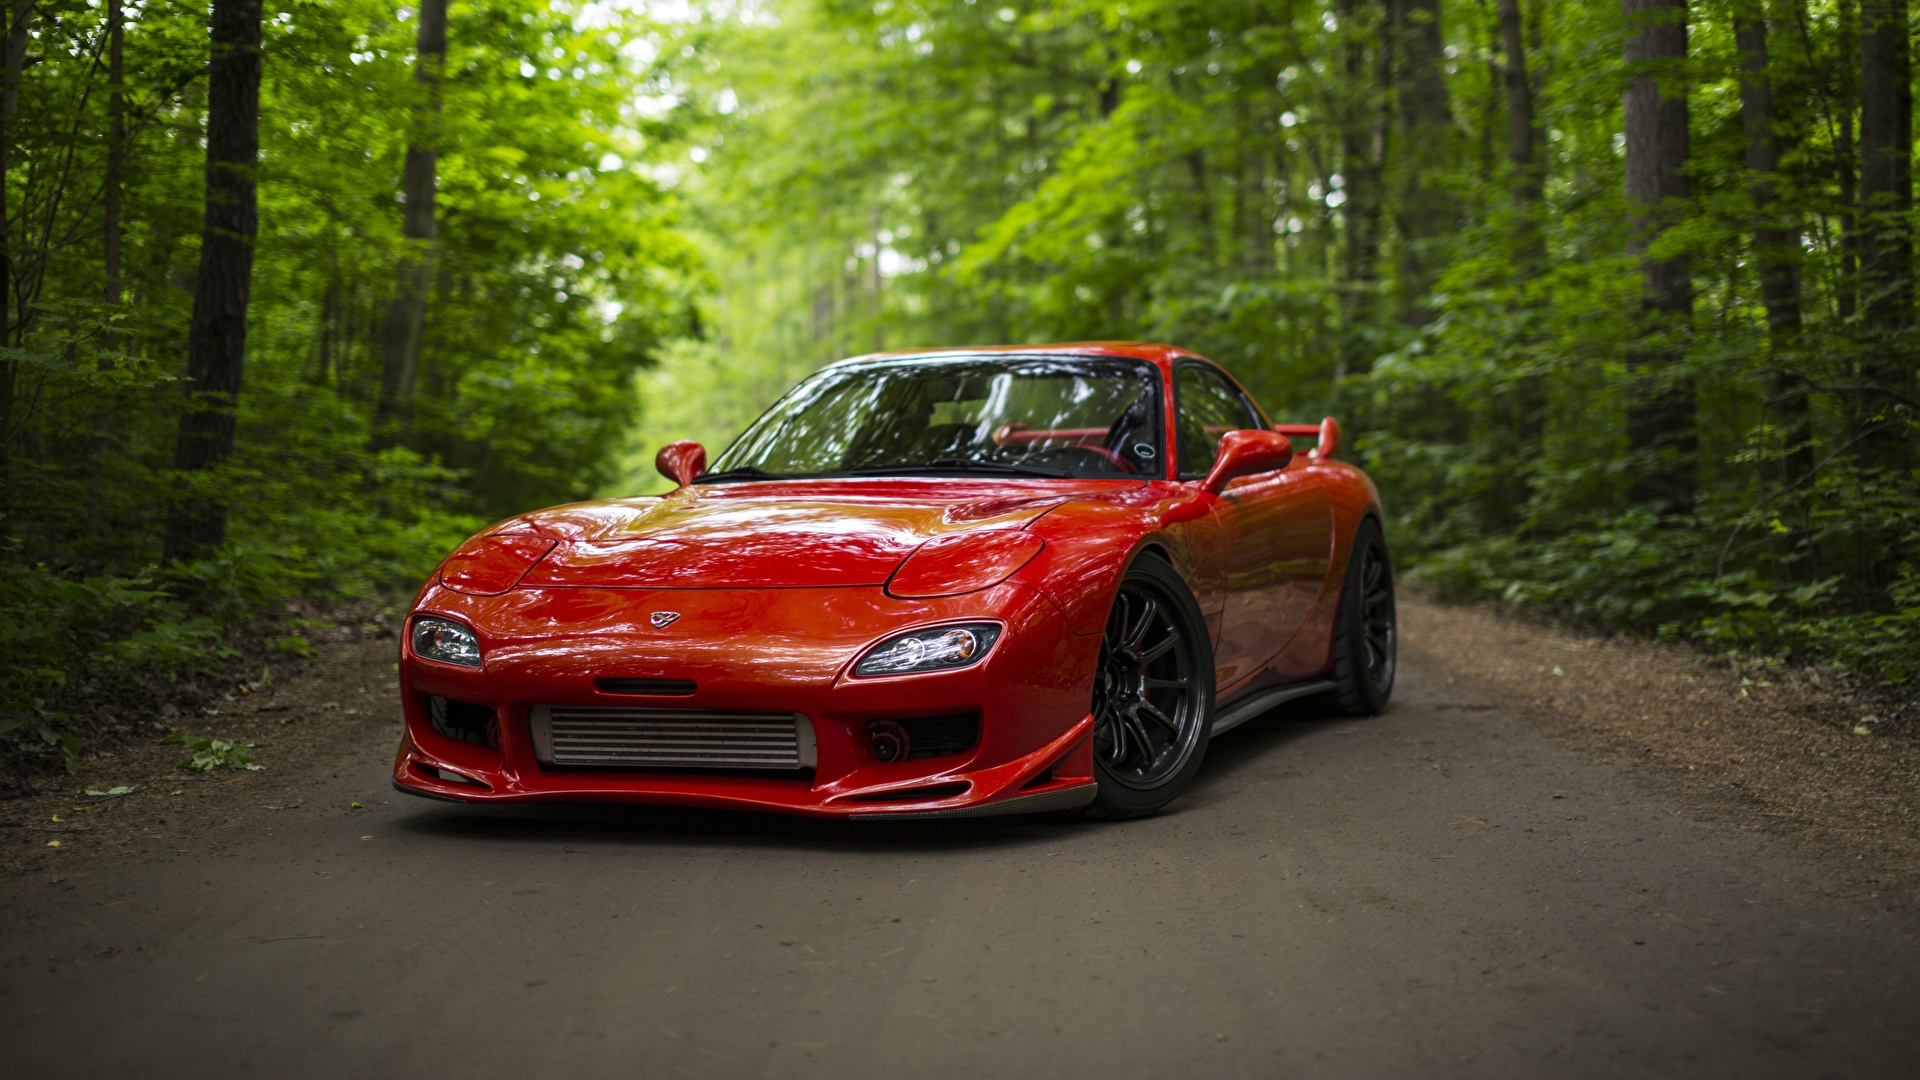 Photo Mazda Rx 7 Red Auto 1920x1080 Images, Photos, Reviews